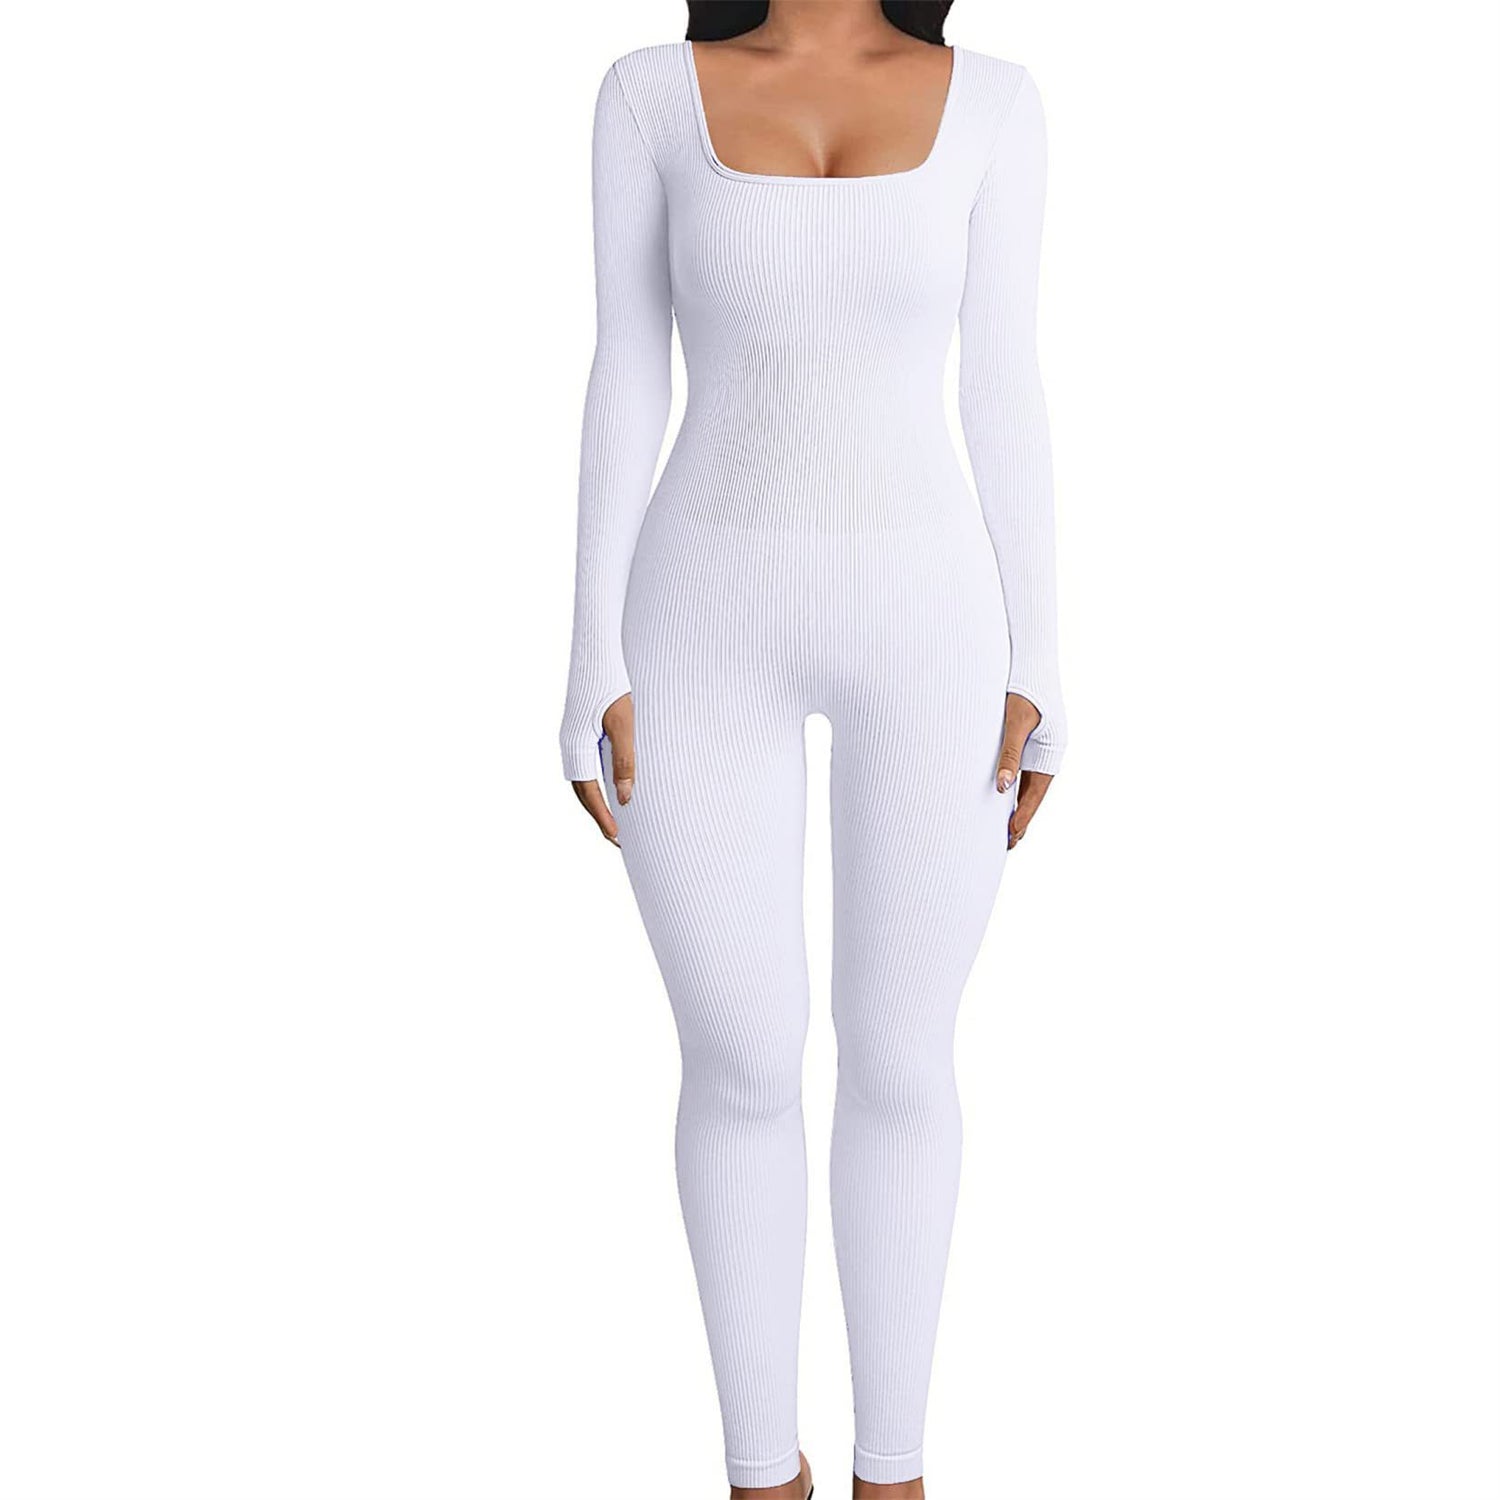 Jumpsuit  | Urban Chic: One-Piece Thread Bodysuit in Dazzling Colors – Sizes S to 3XL | 2XL |  White| thecurvestory.myshopify.com